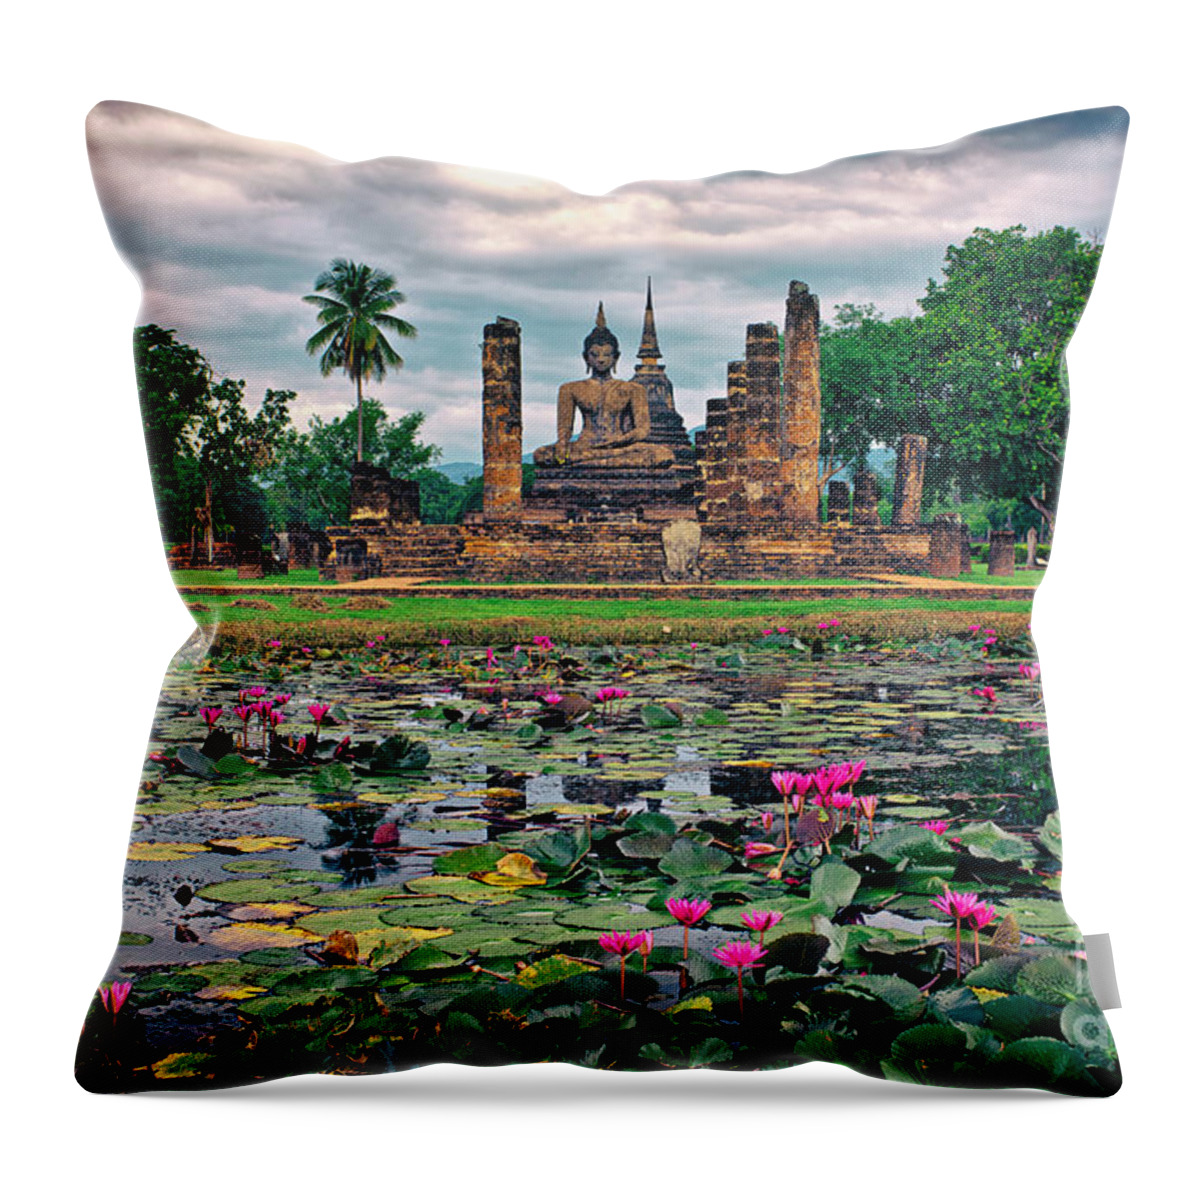 Thailand Throw Pillow featuring the photograph Finding Peace at Wat Mahathat by Sam Antonio